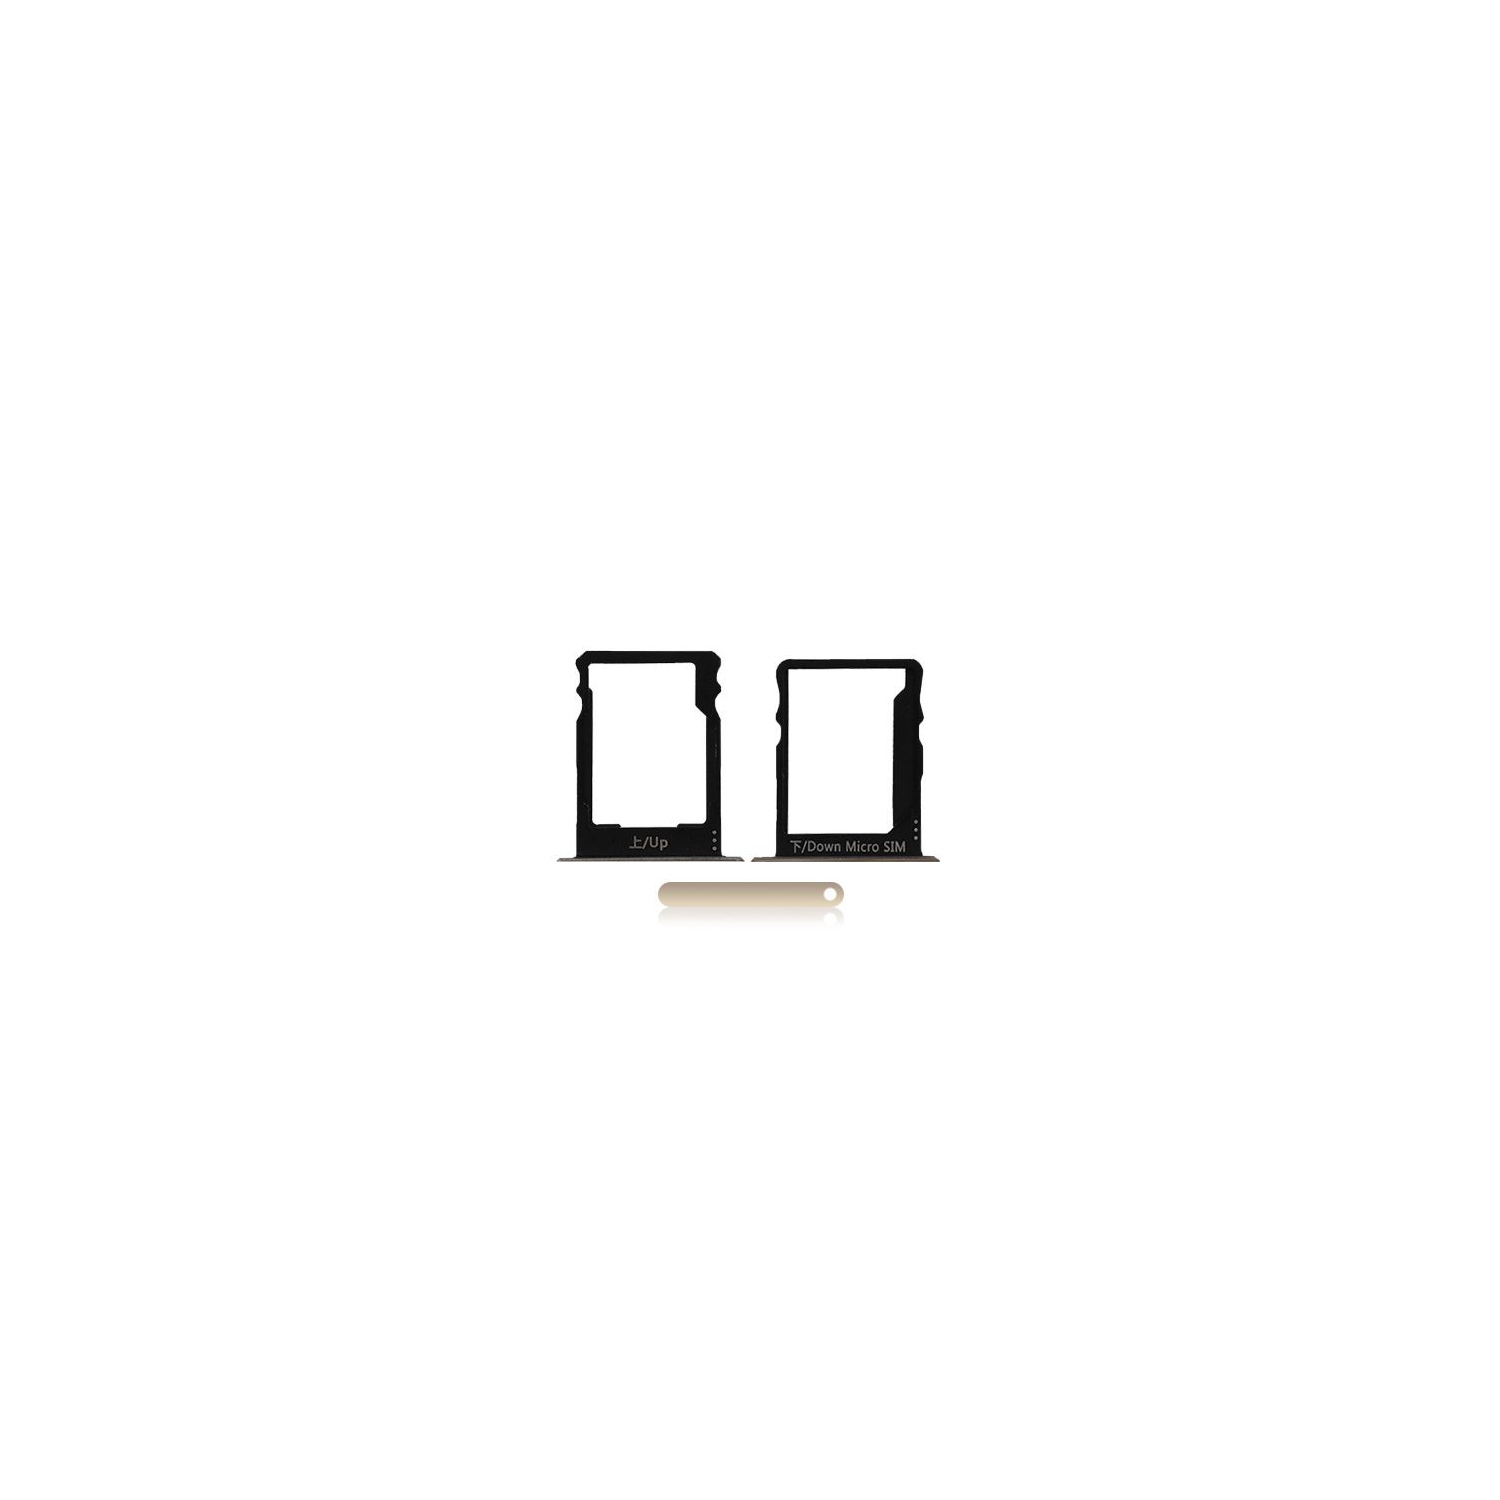 Replacement Sim Card + SD Card Tray Compatible For Huawei P8 Lite (Gold)